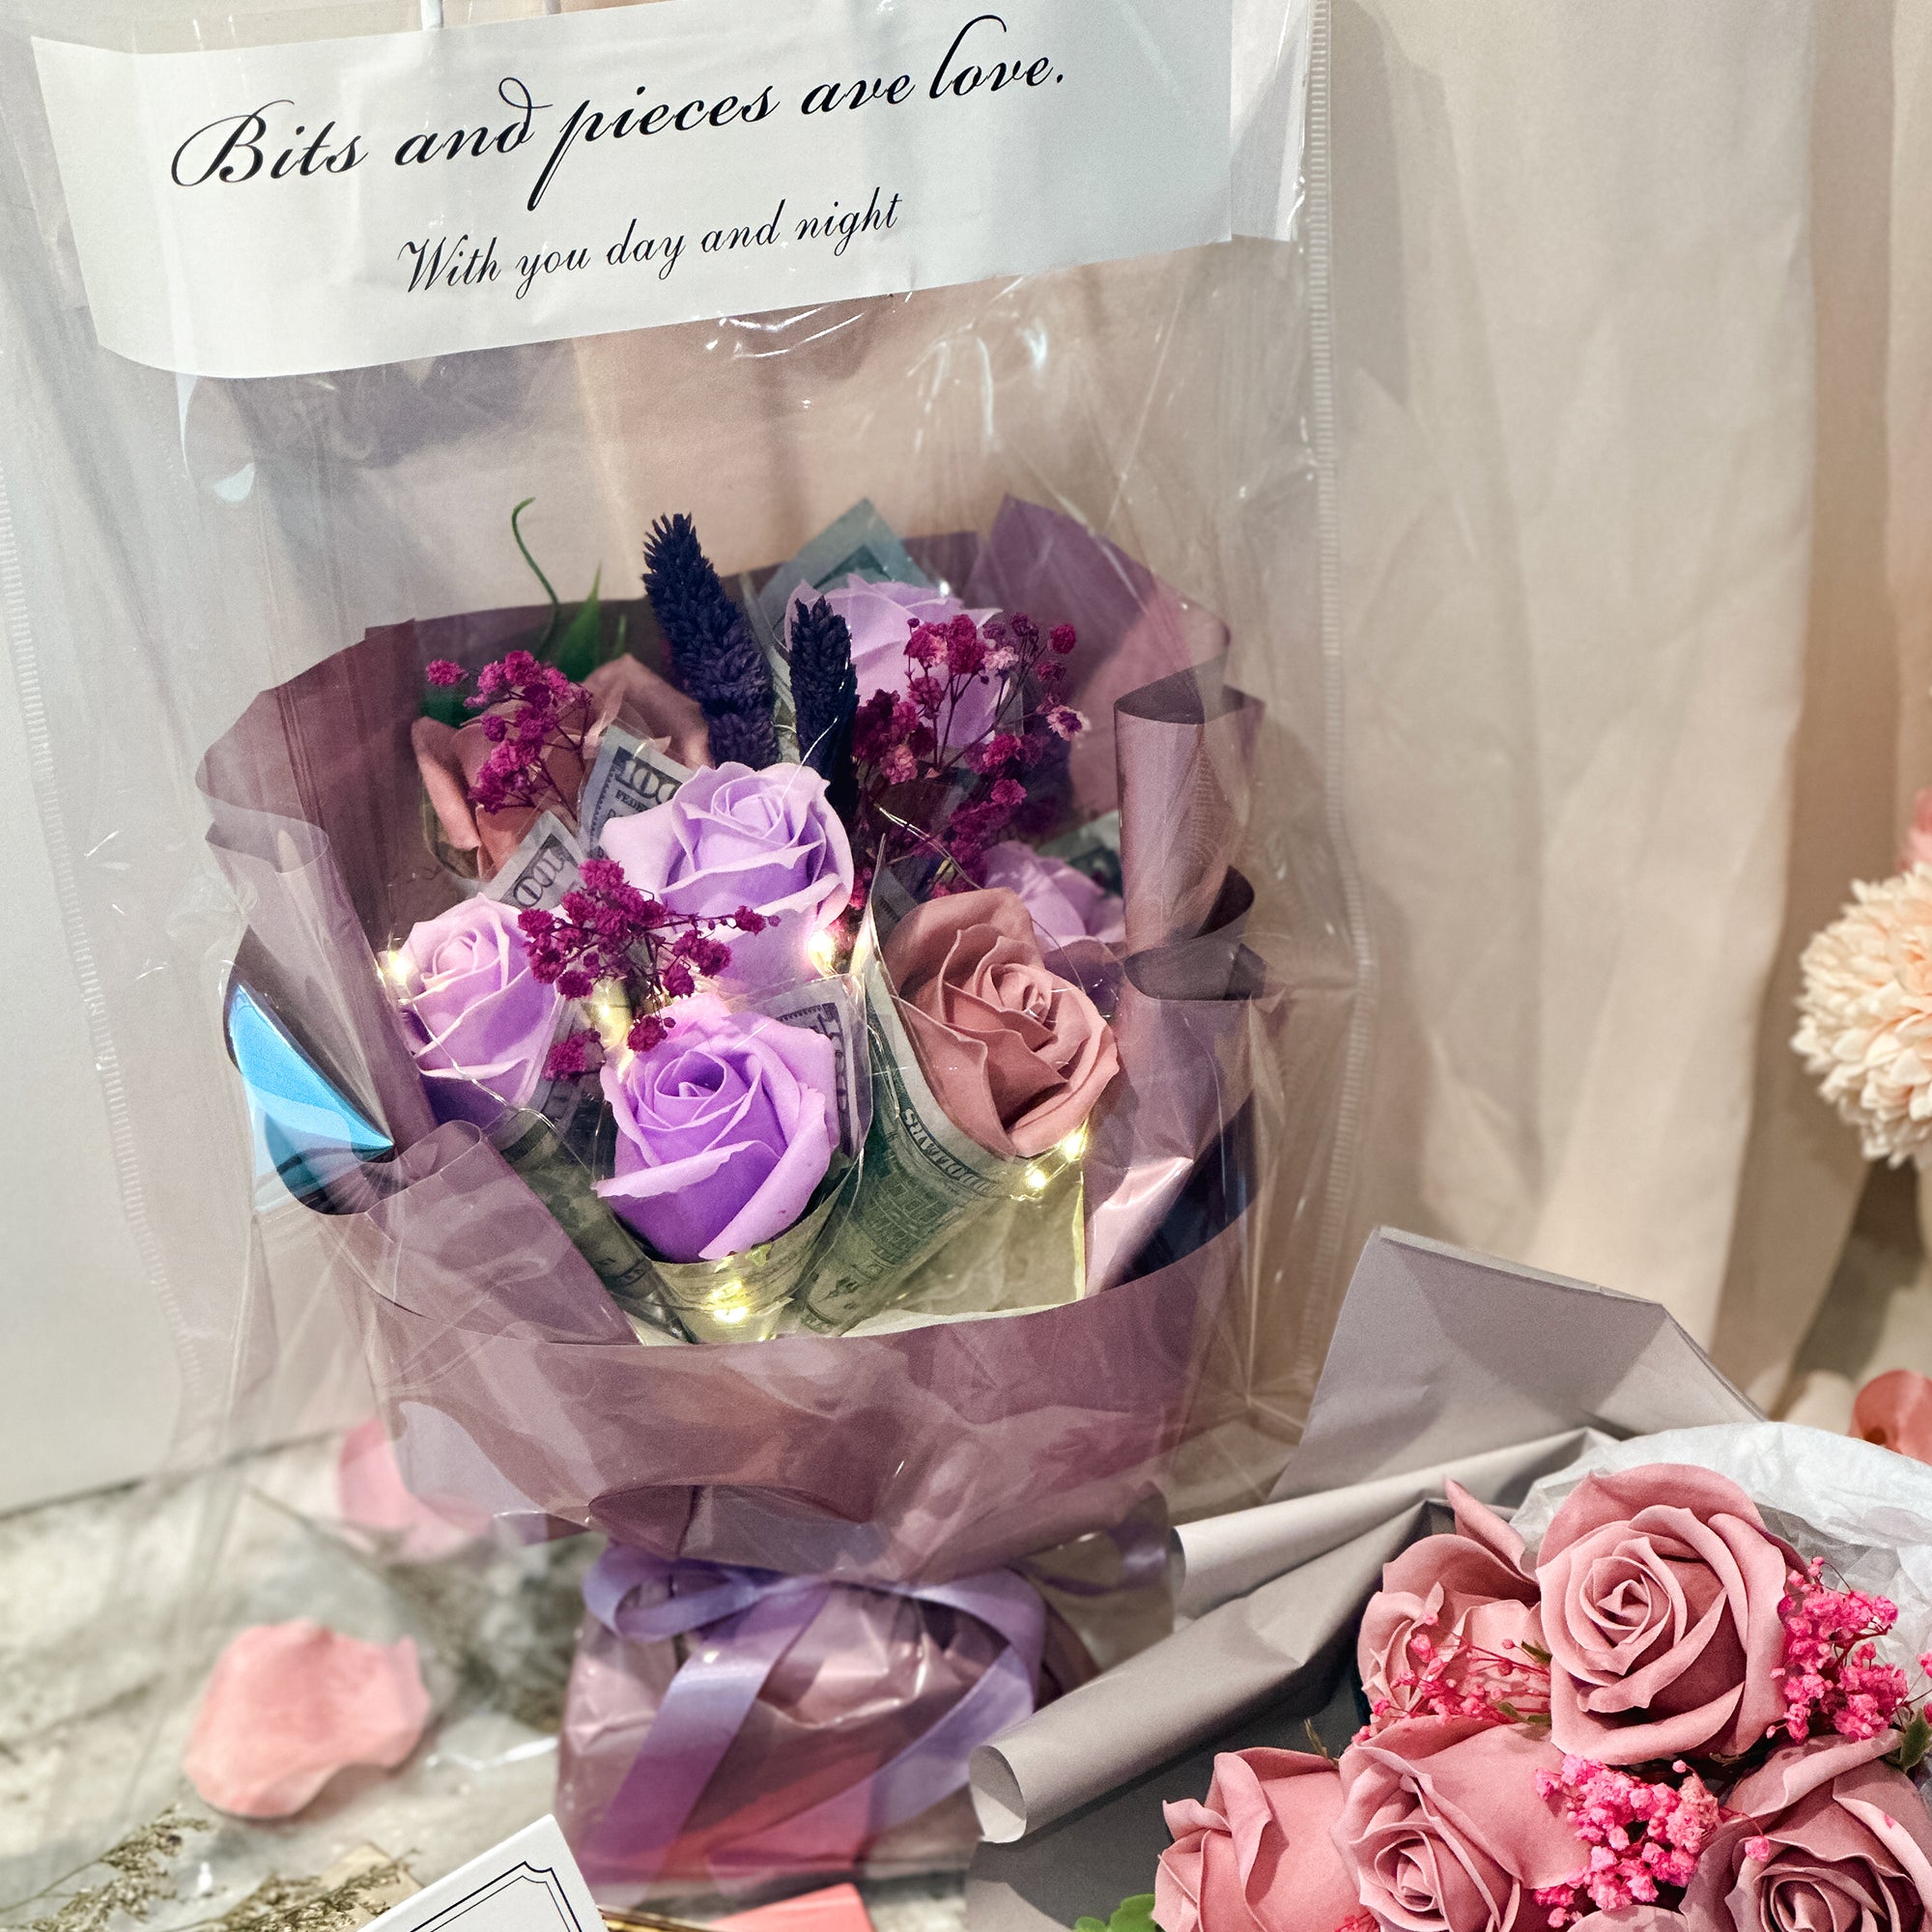 $520 I Love You Bouquet - Luxury Cash Money Bouquet(2 days Preorder, Cash  Notes Included)